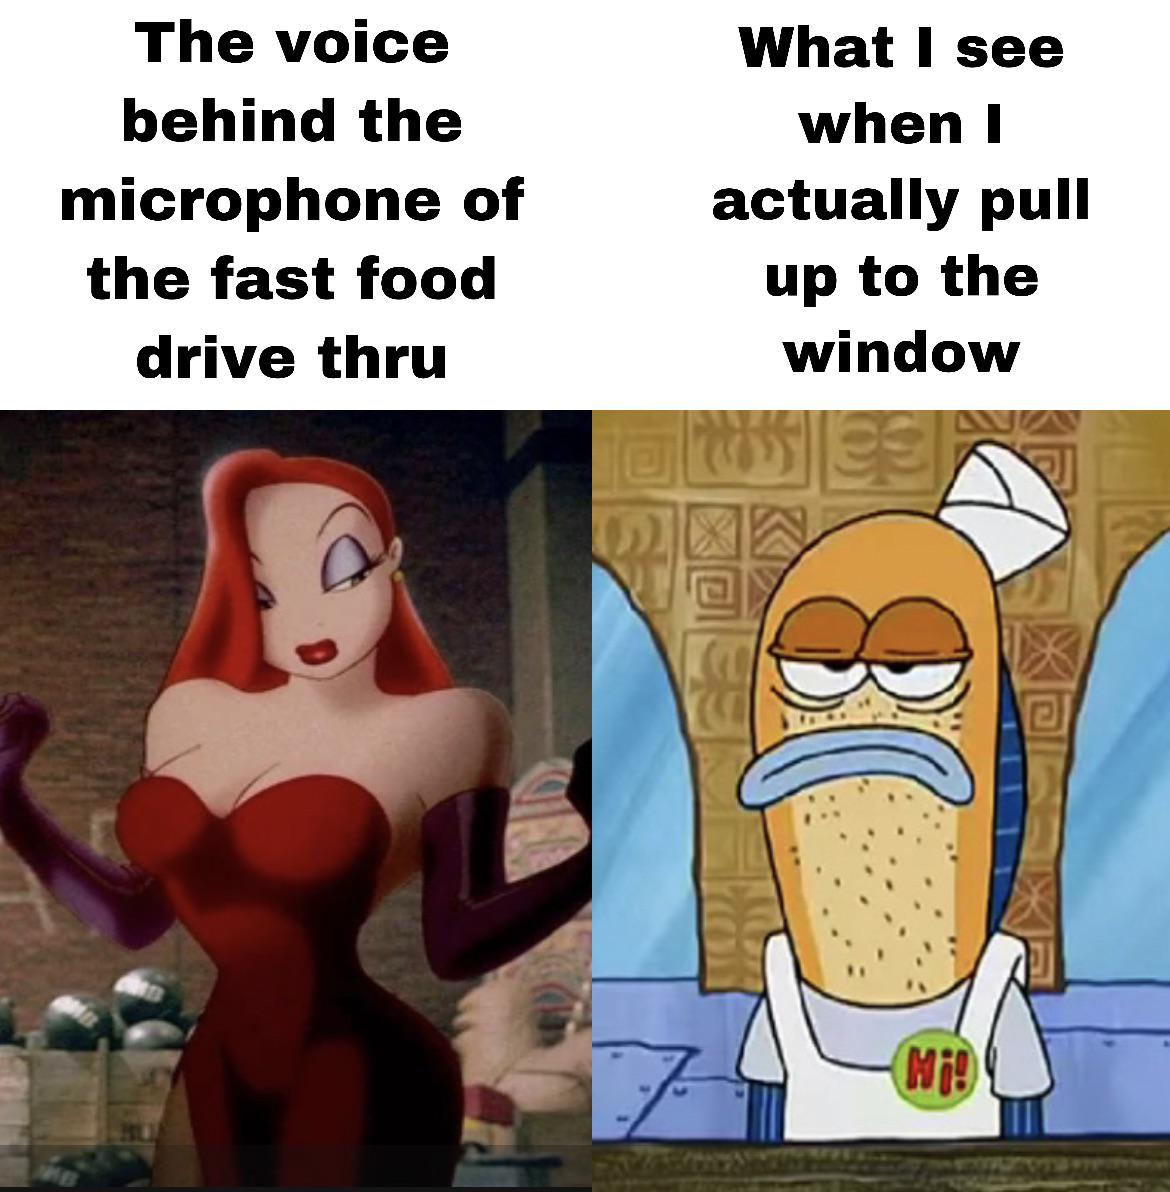 funny friday memes - cartoon - The voice behind the microphone of the fast food drive thru What I see when I actually pull up to the window Mee Jocem 80 Hi!